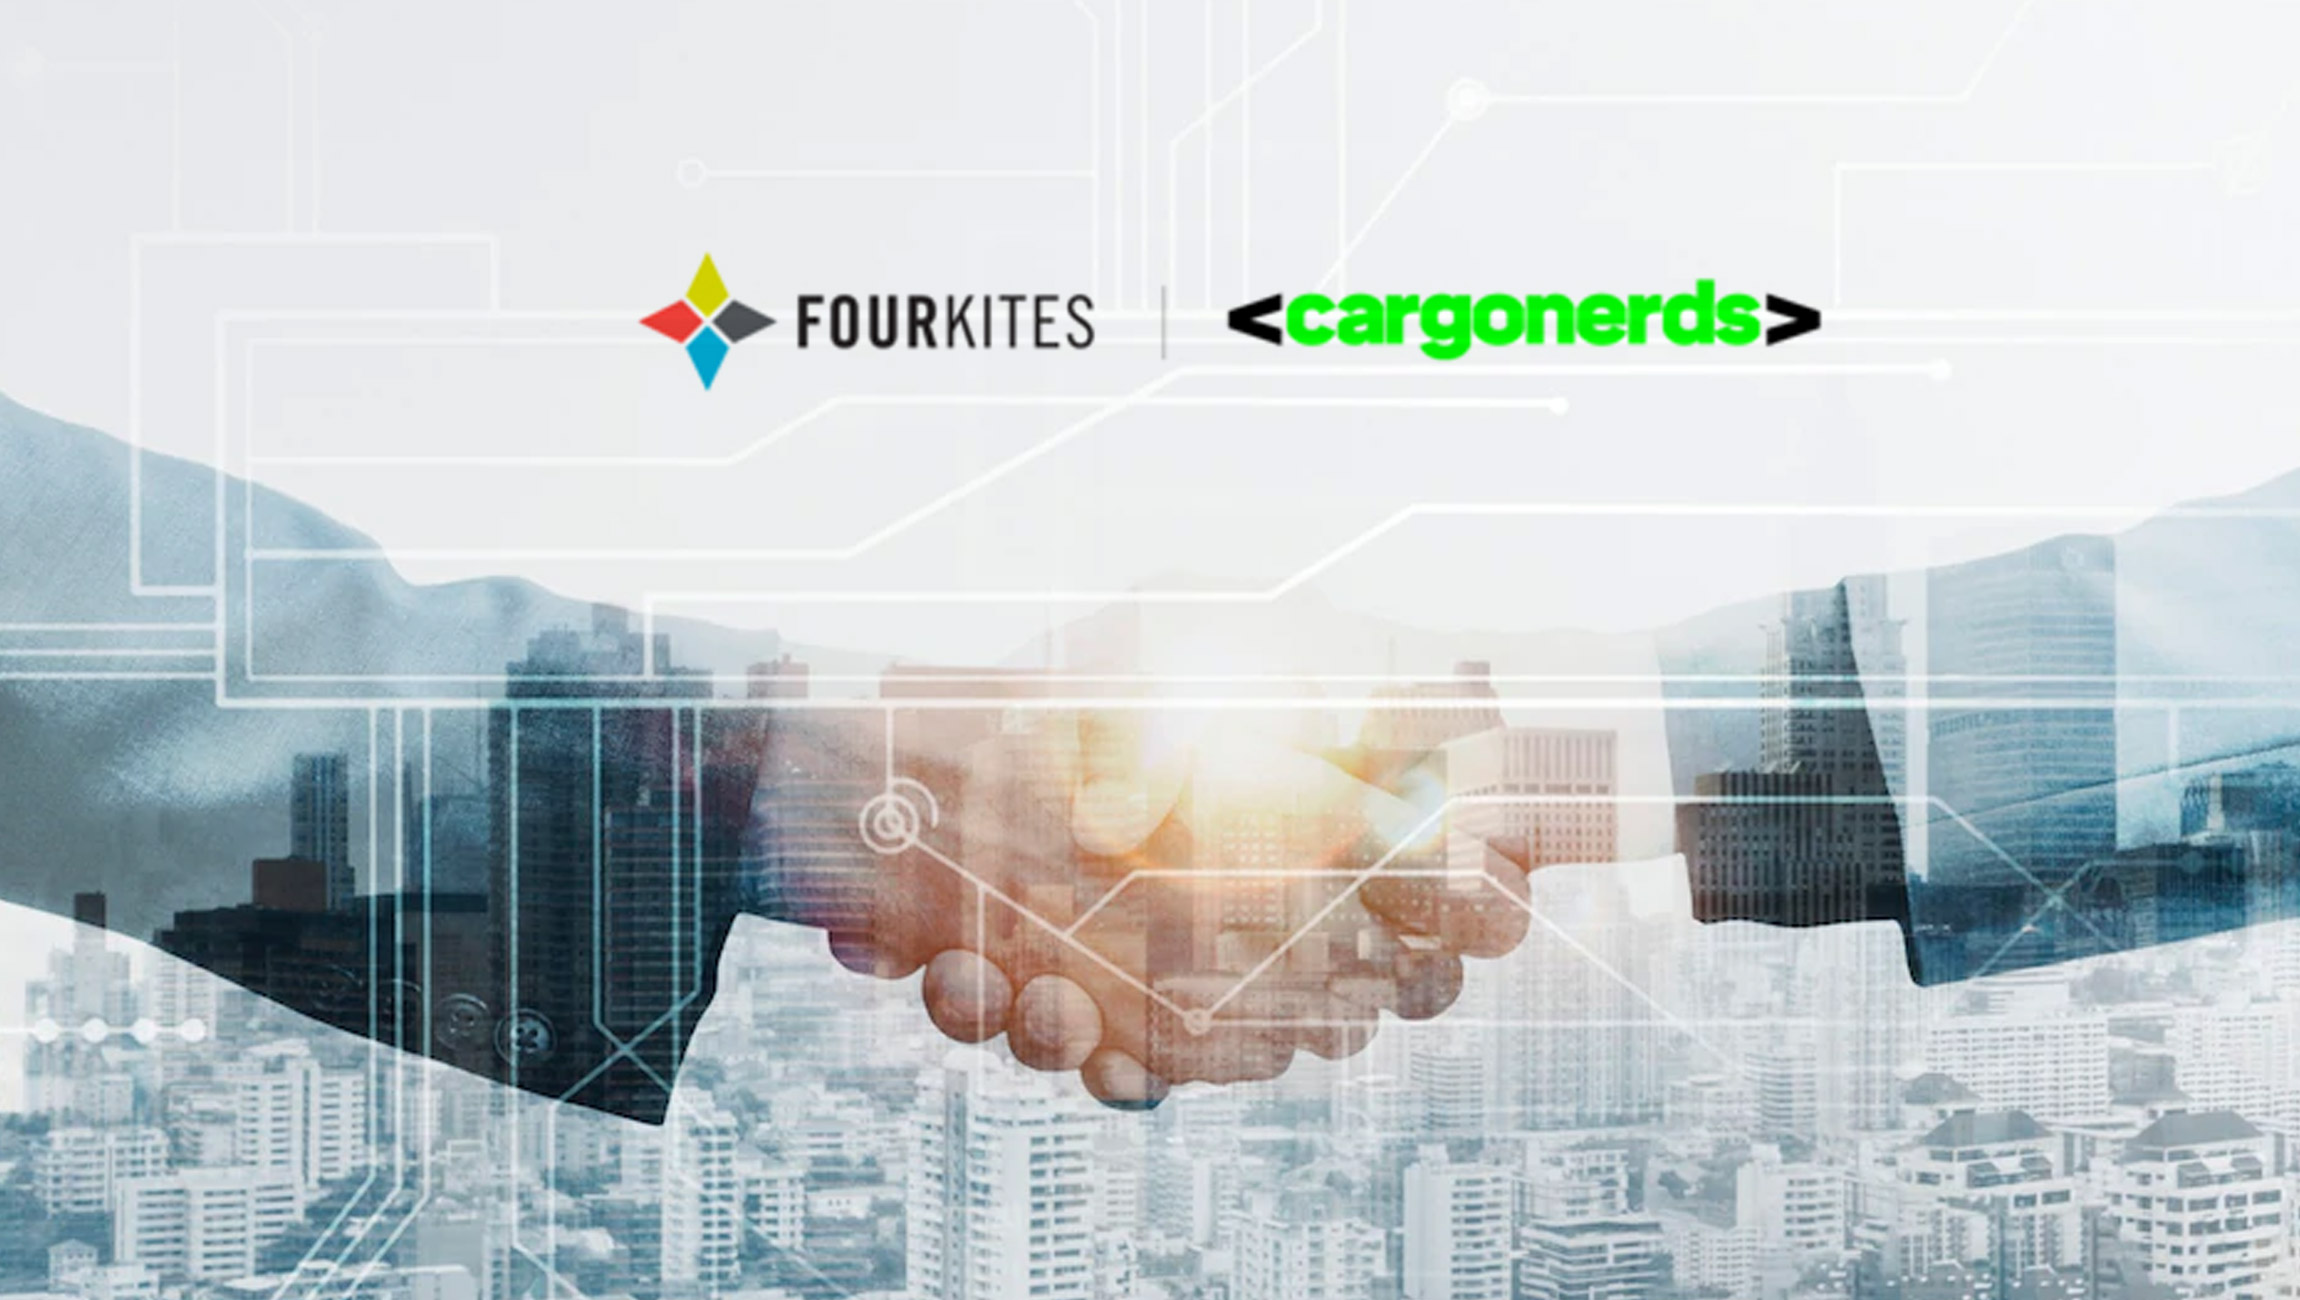 FourKites & cargonerds Partner to Bring Enhanced Cost & Time Savings to Global Freight Forwarders & Shippers